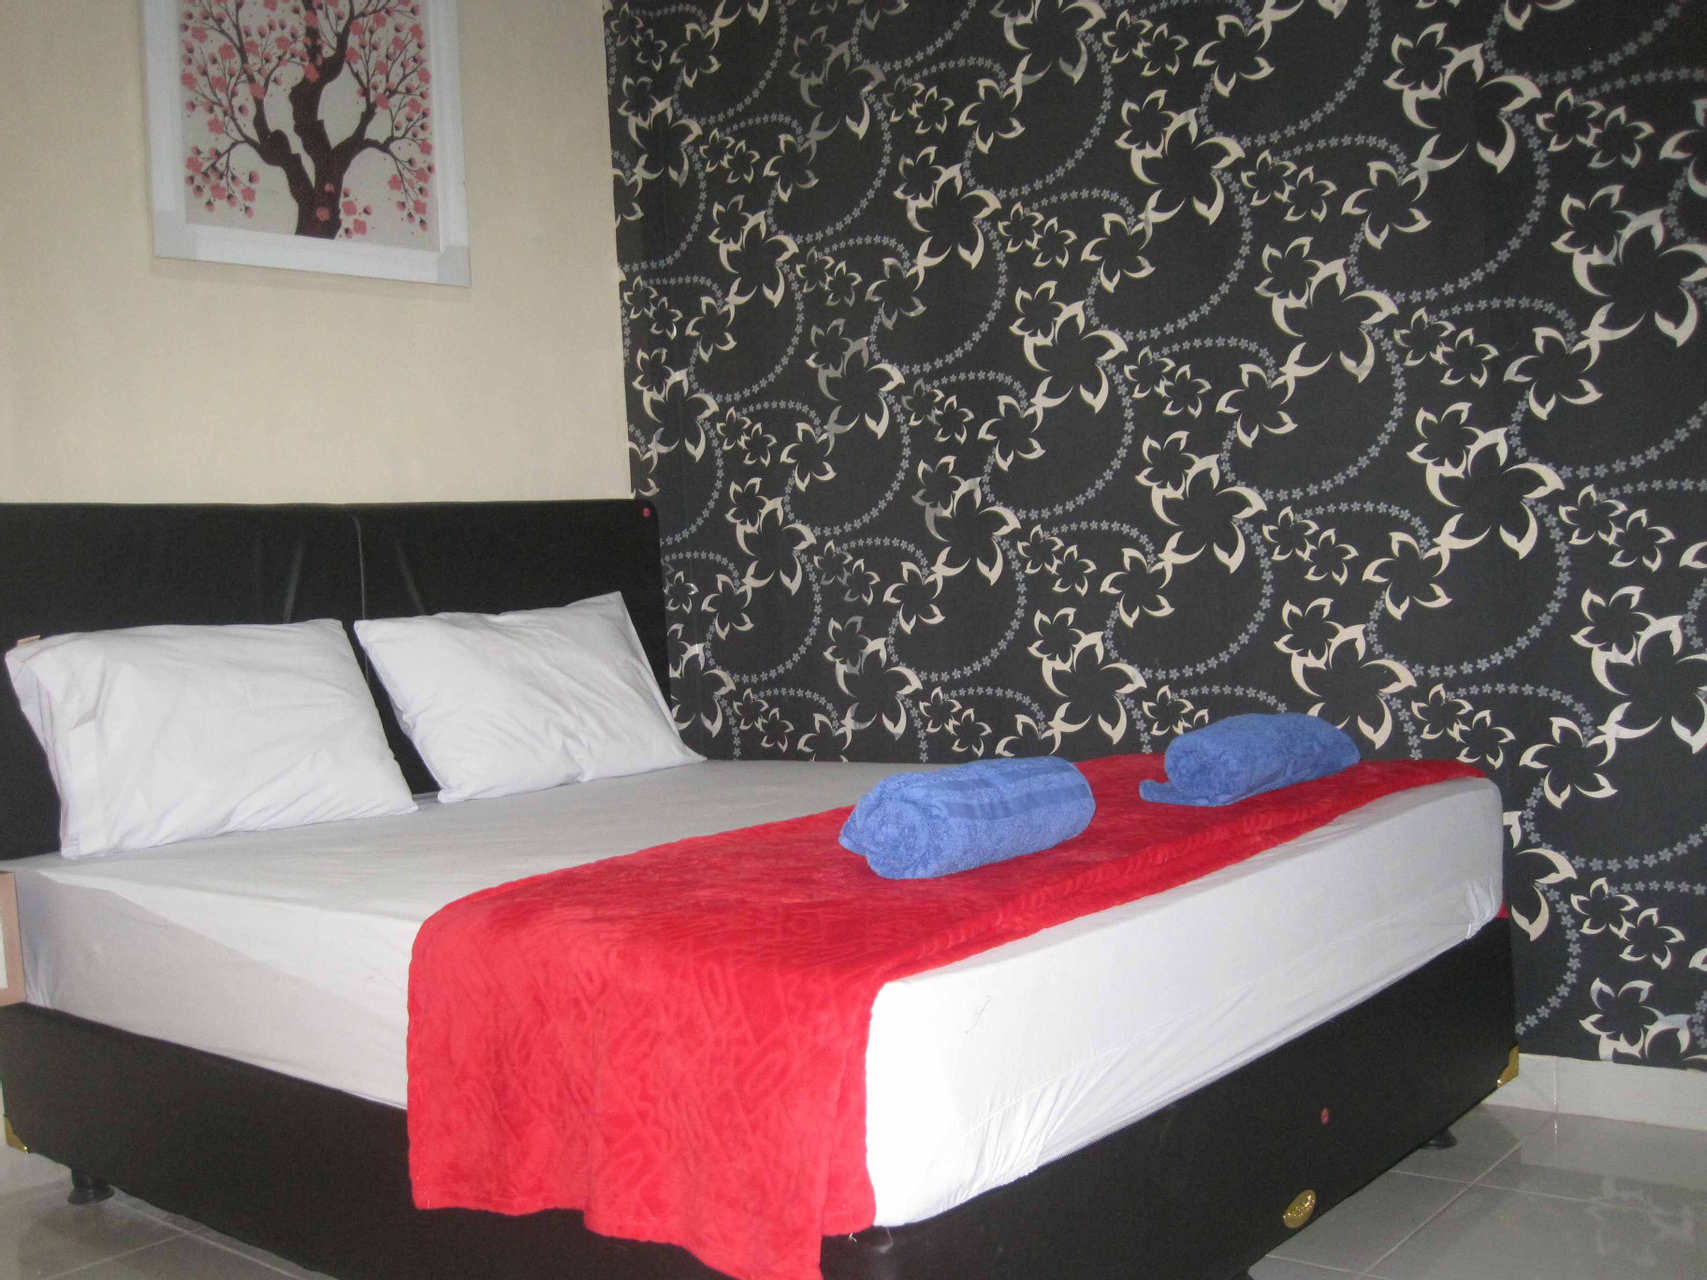 Others 1, Double Tree Kost & Guest House, Banyumas